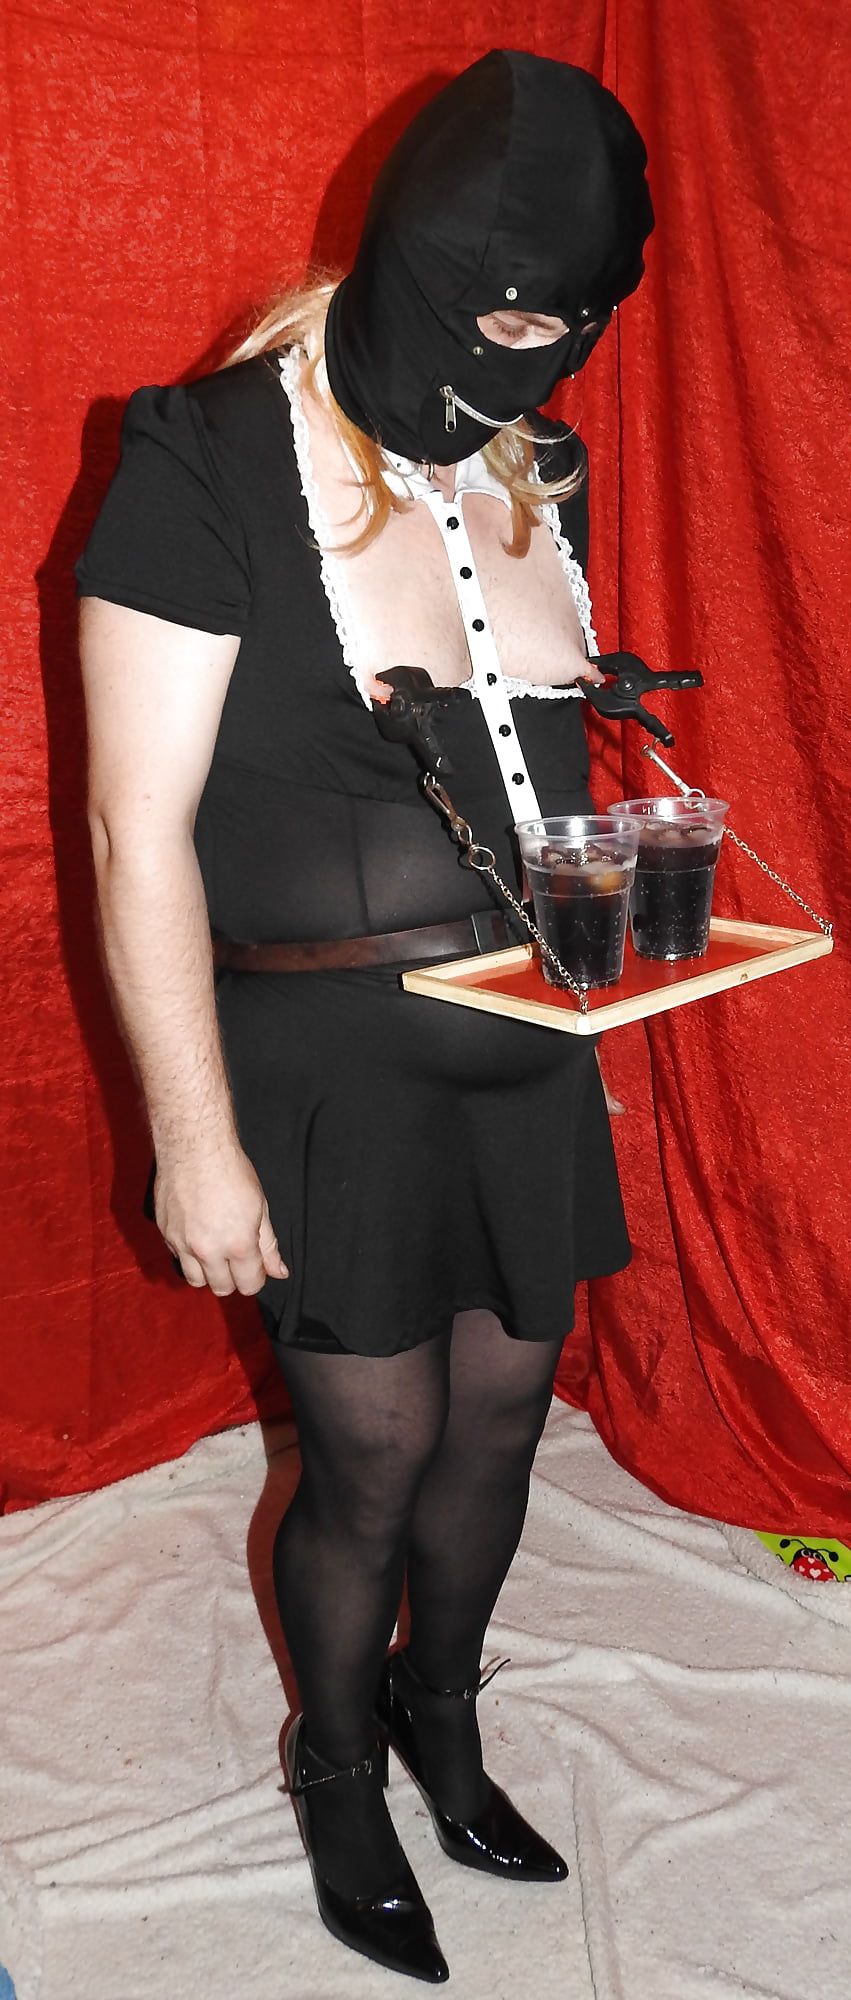 SissyMaid served cold drinks #9